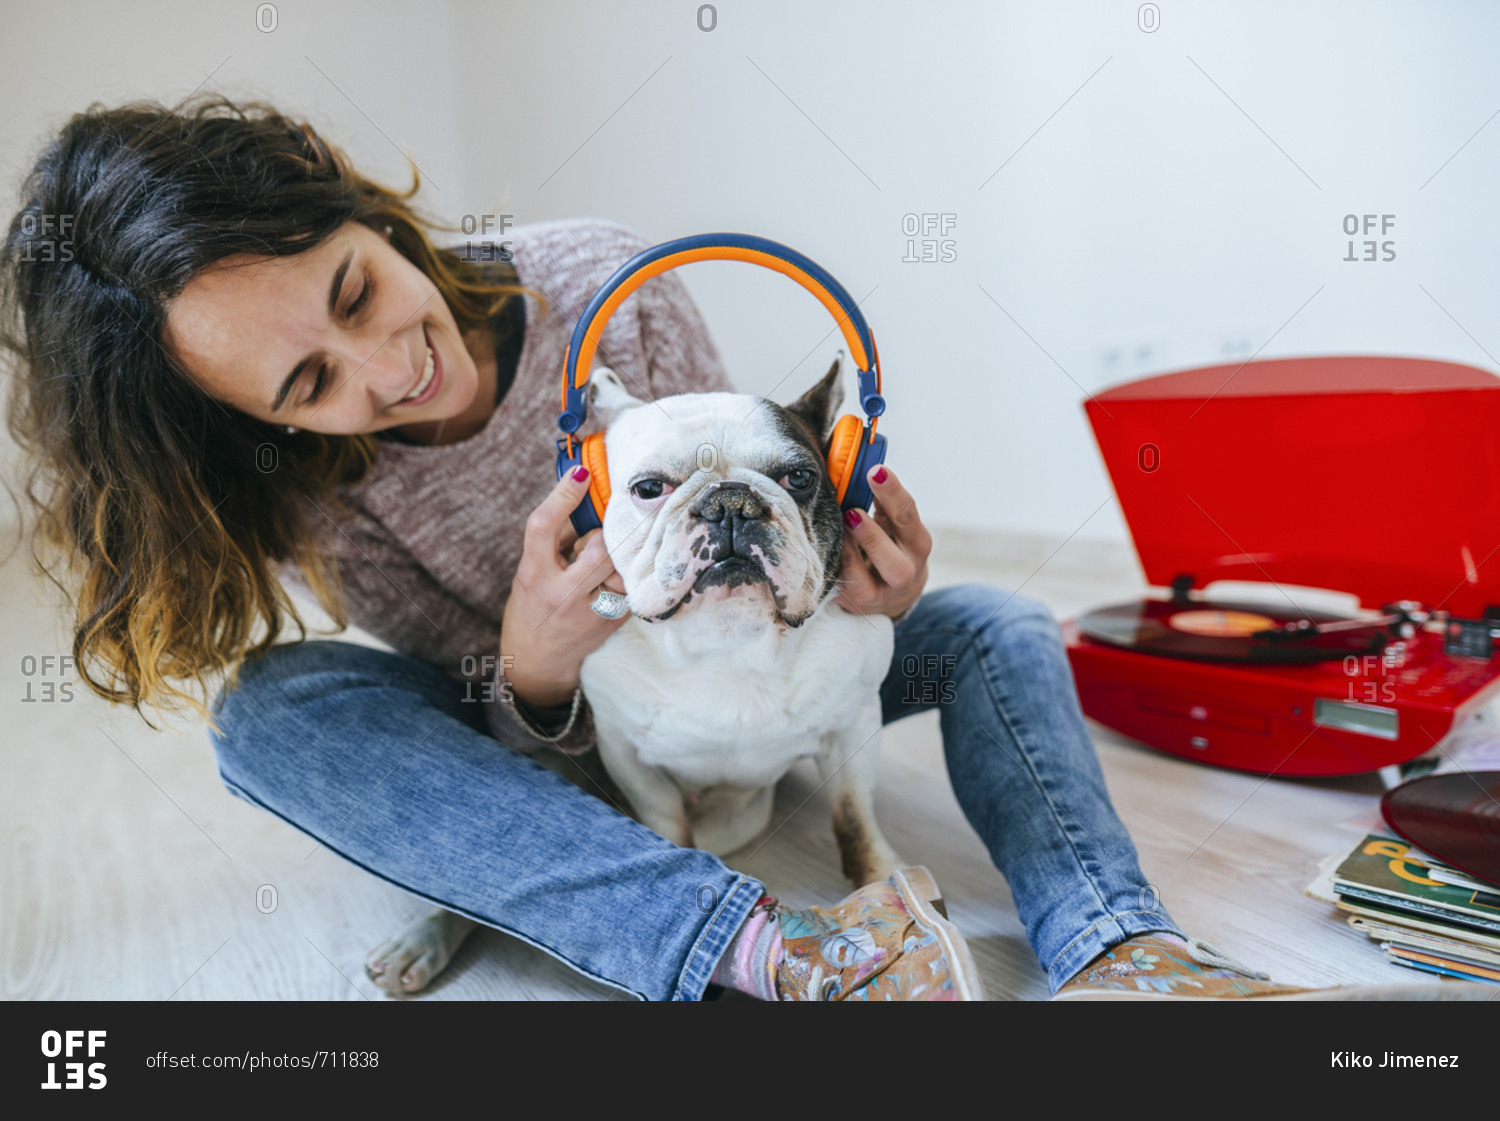 Woman puts headphones on her French Bulldog to listen to record playing on turntable